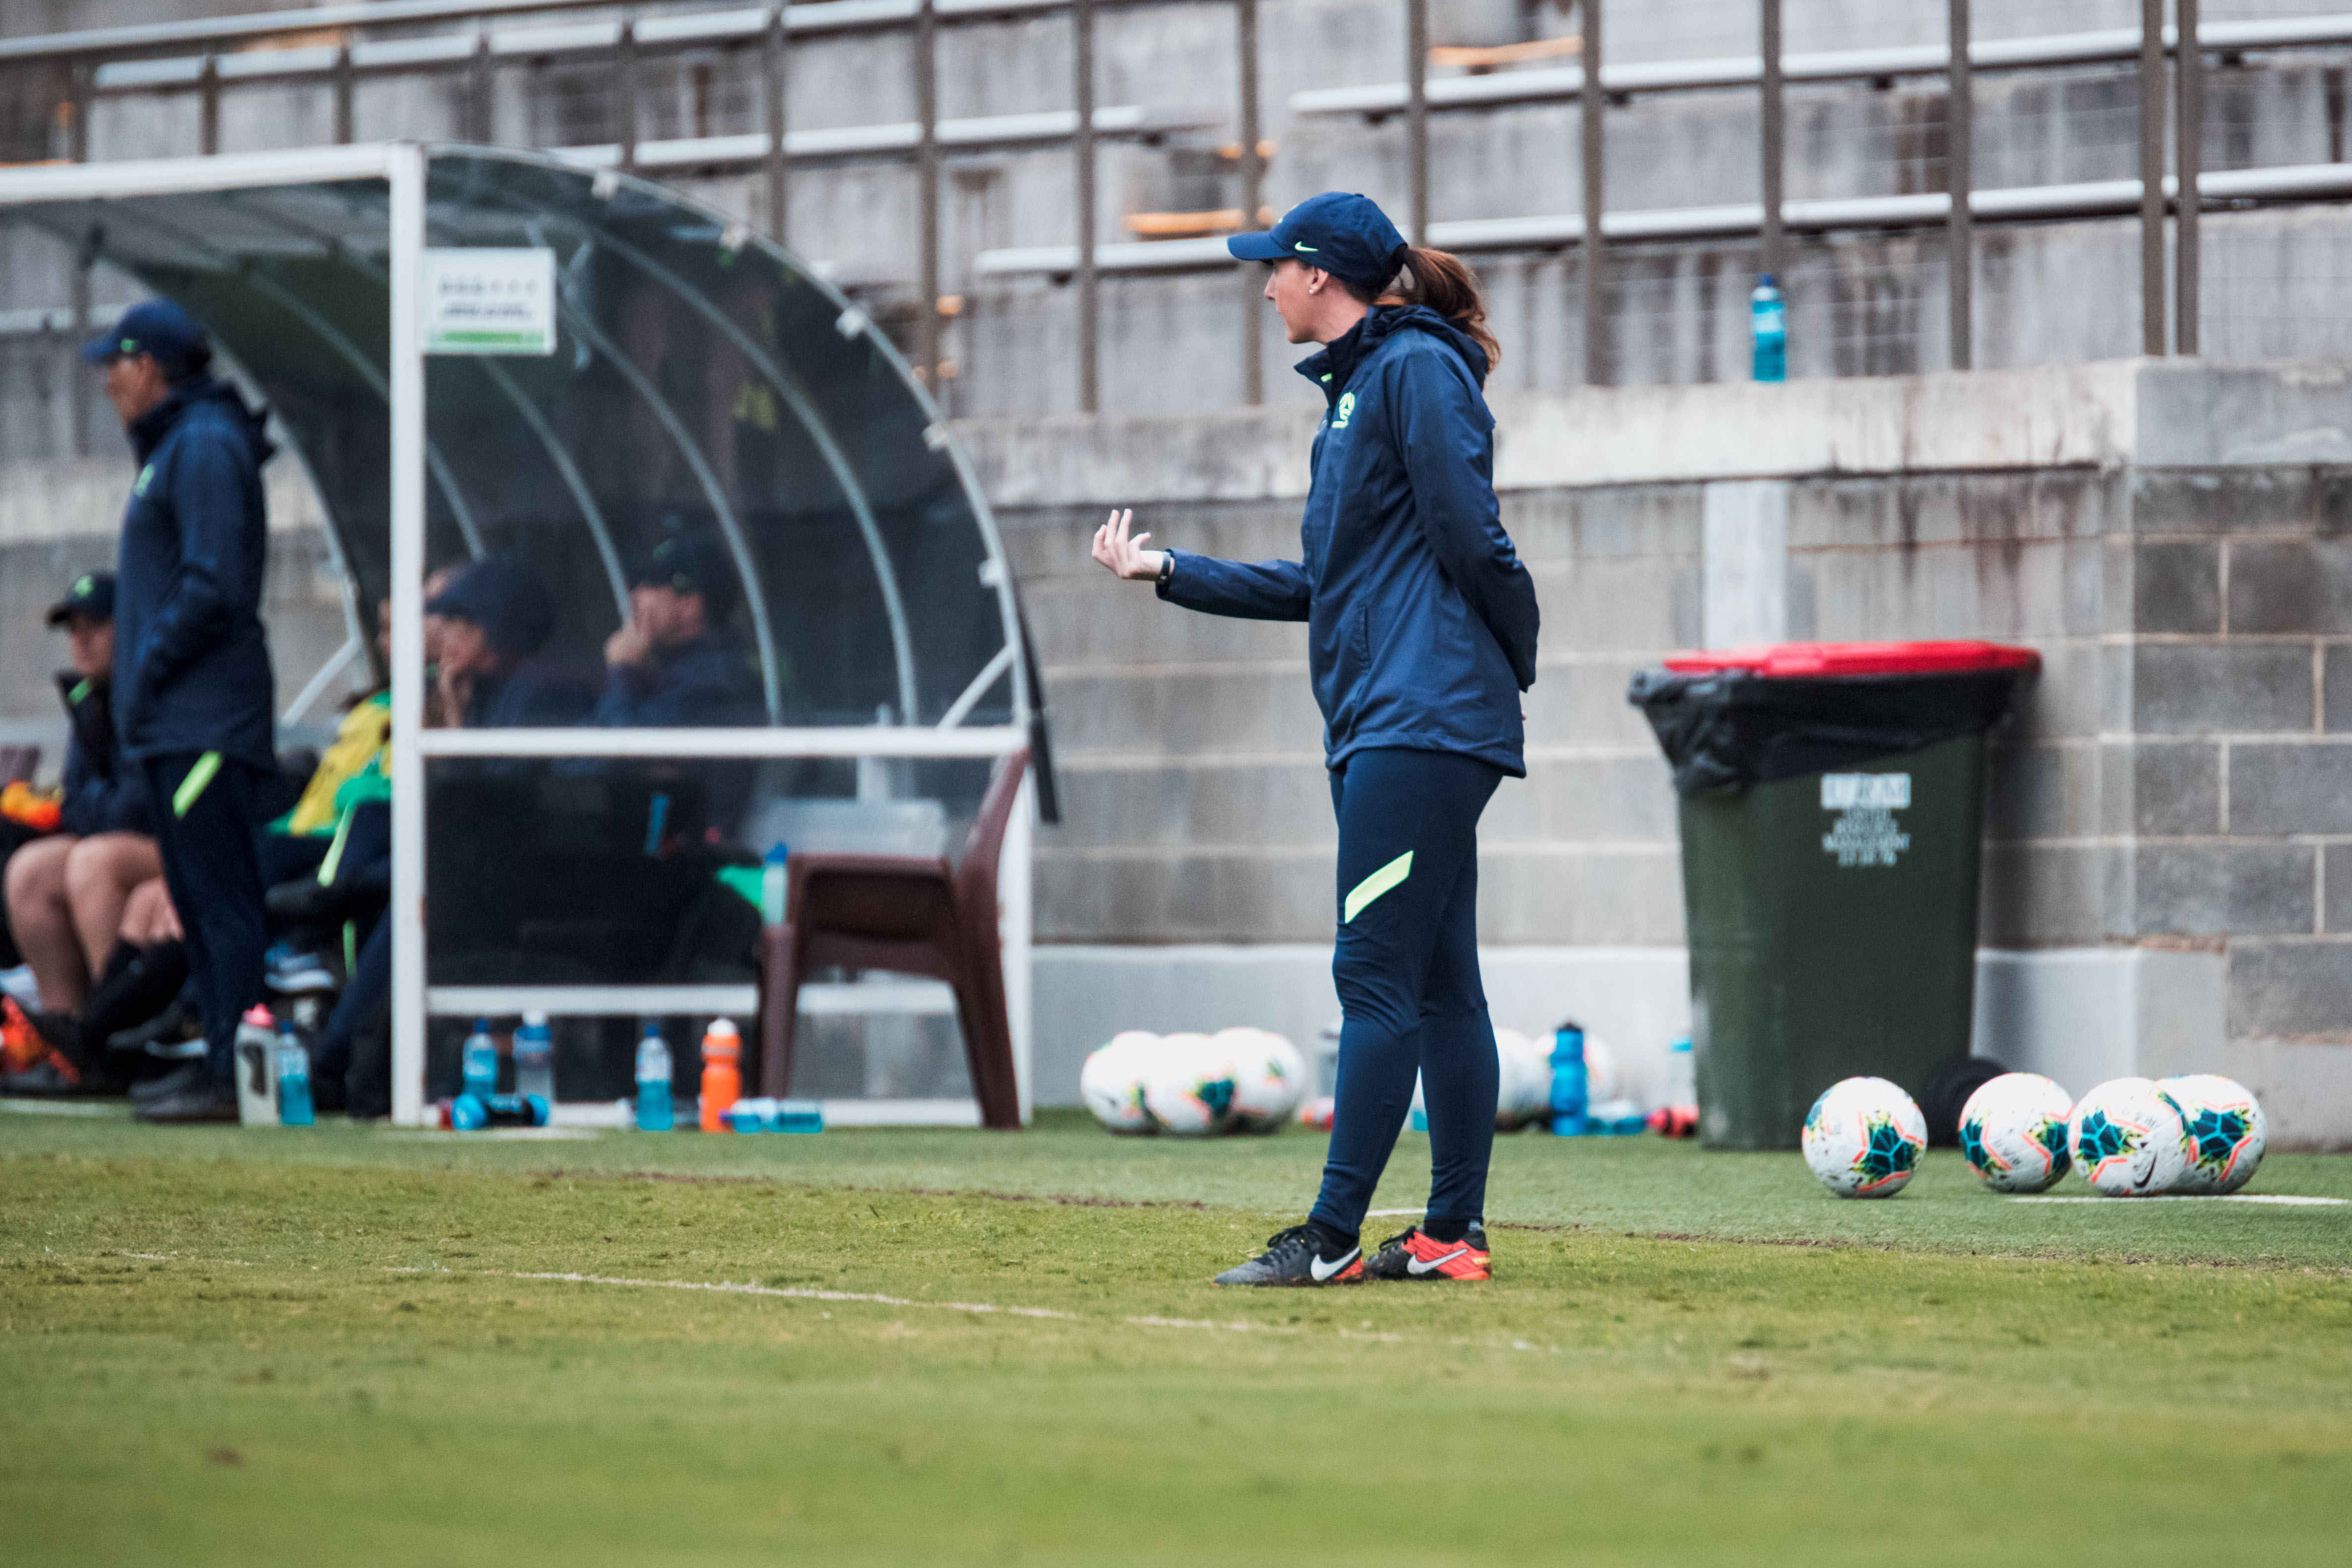 CommBank Junior Matildas Assistant Coach and Analyst, Kat Smith in camp. (Photo: Ann Odong / Football Australia)